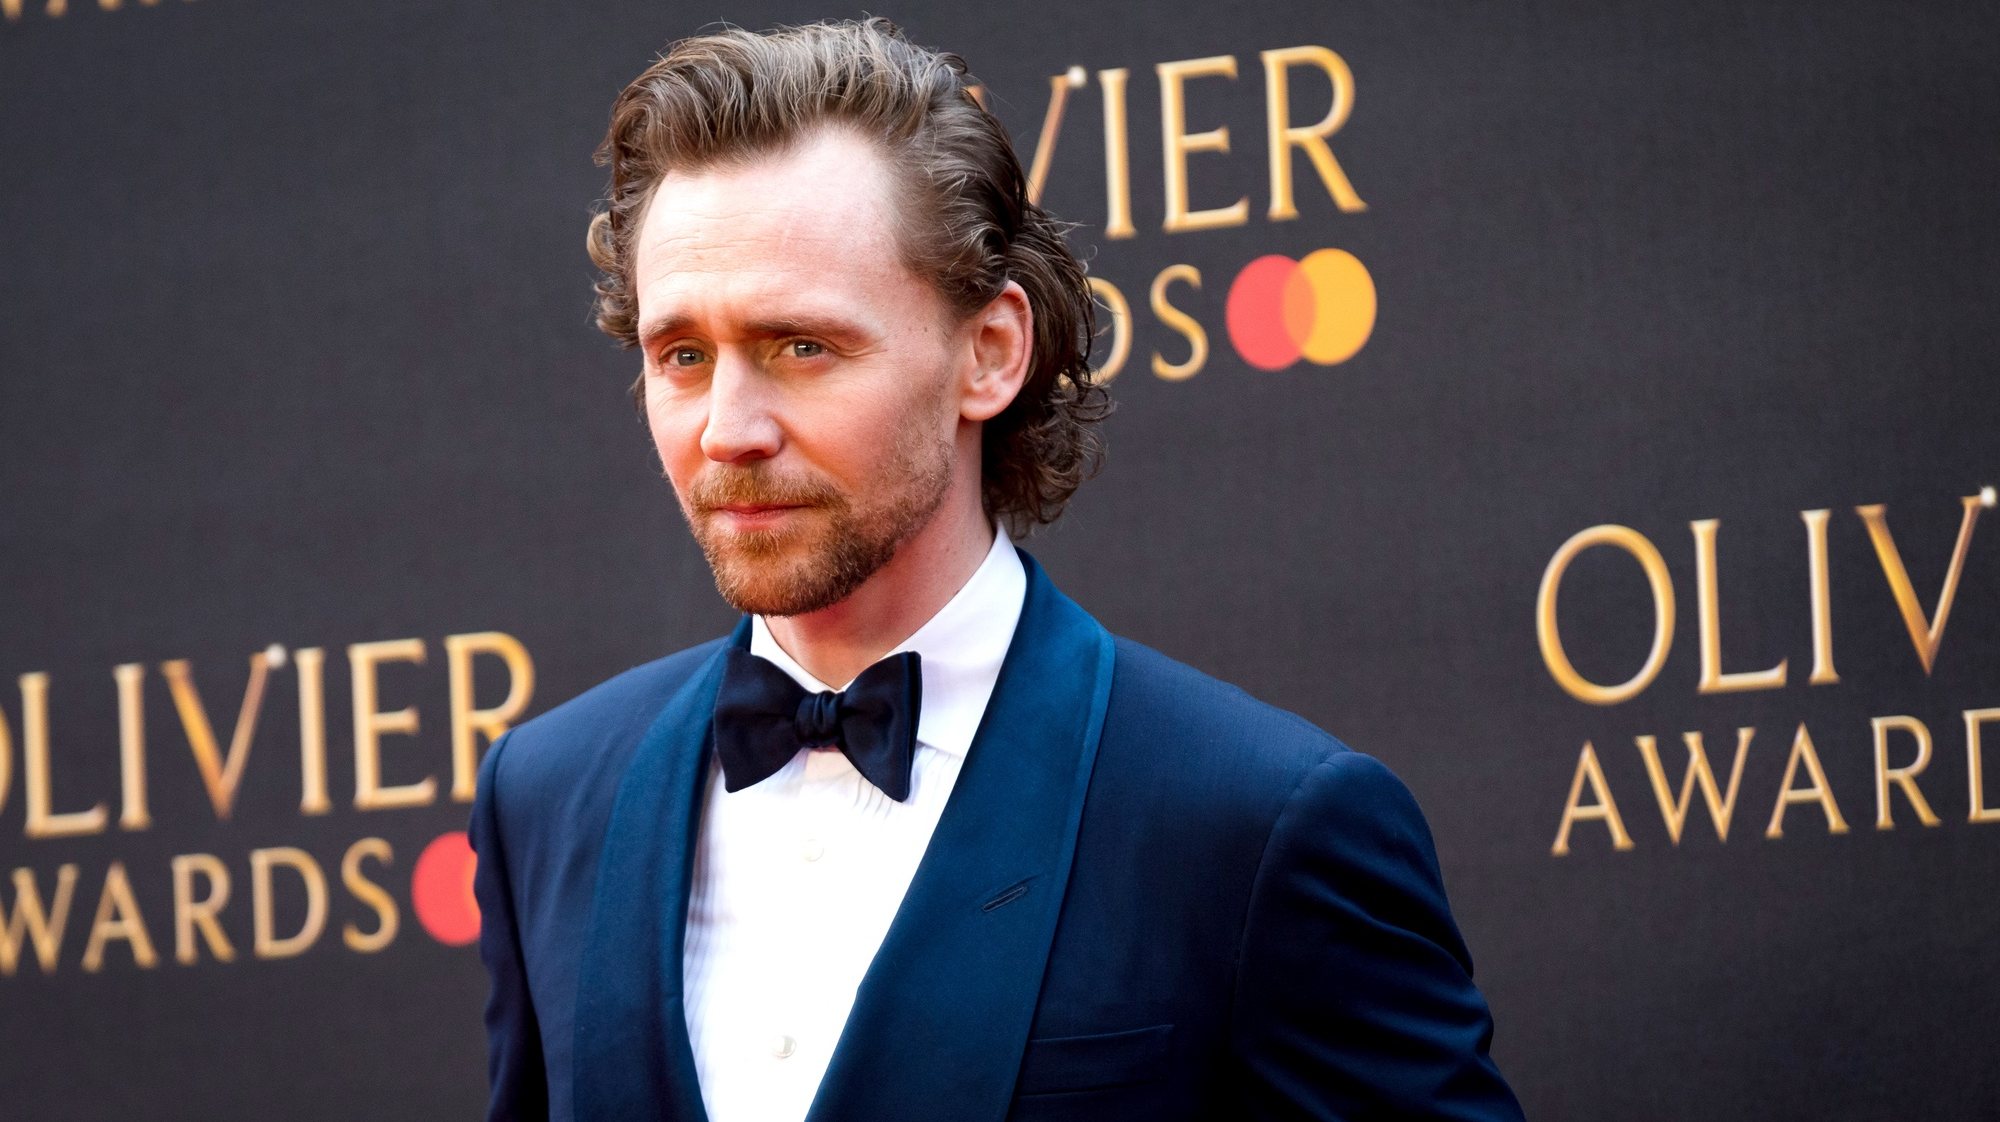 epa07490901 British actor Tom Hiddleston arrives at the Olivier Awards at the Royal Albert Hall in London, Britain, 07 April 2019. The Olivier Awards are awarded for outstanding achievements in British theatre.  EPA/VICKIE FLORES